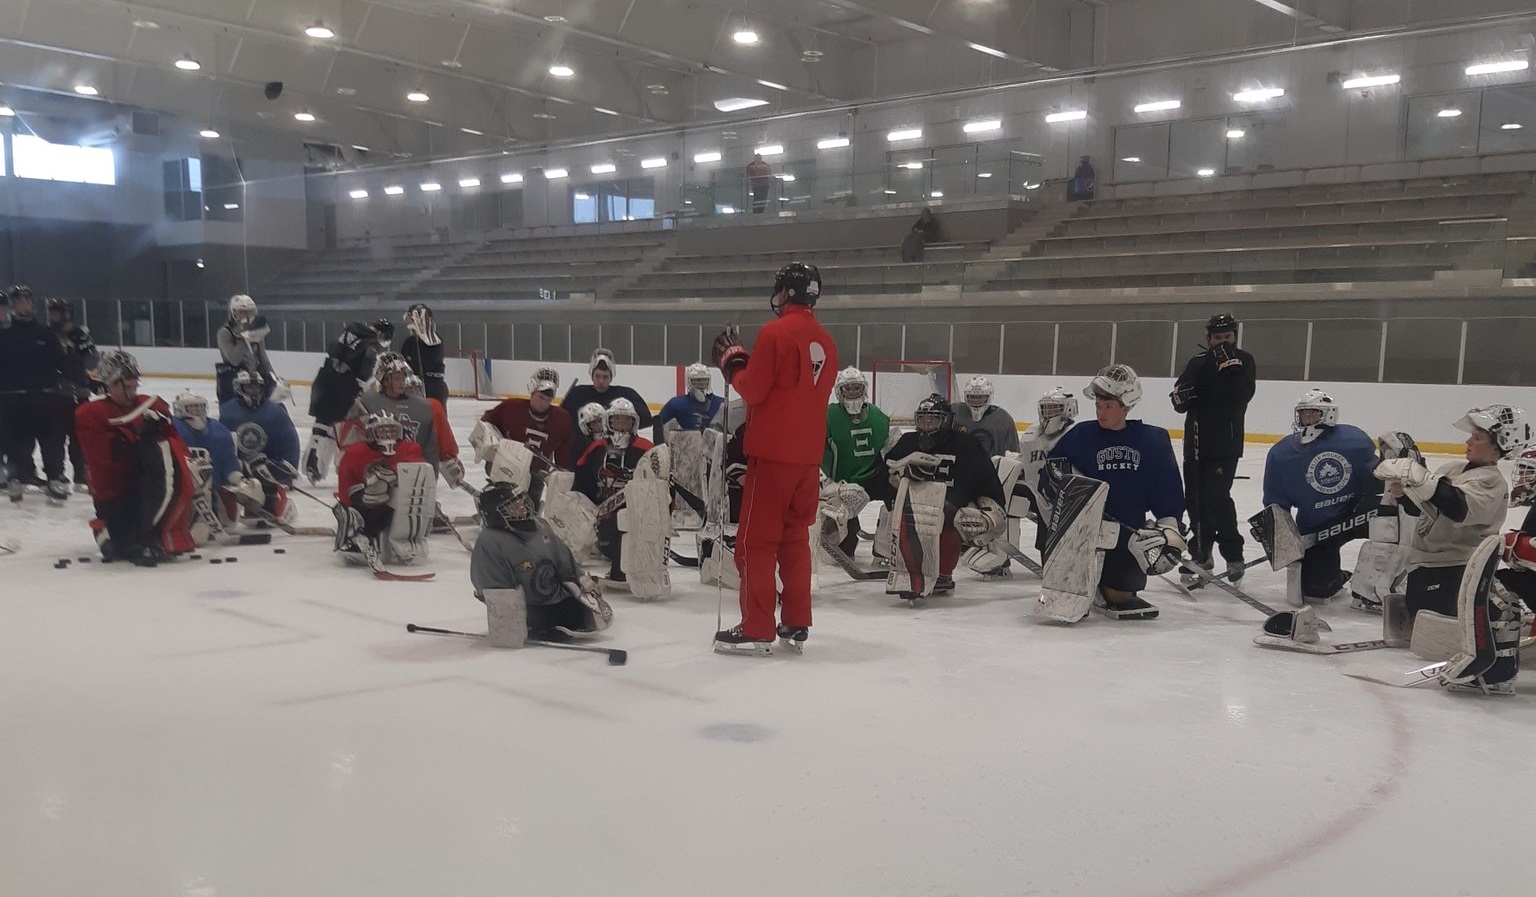 Maxime Ouellet instructing goalies on-ice at hockey camp